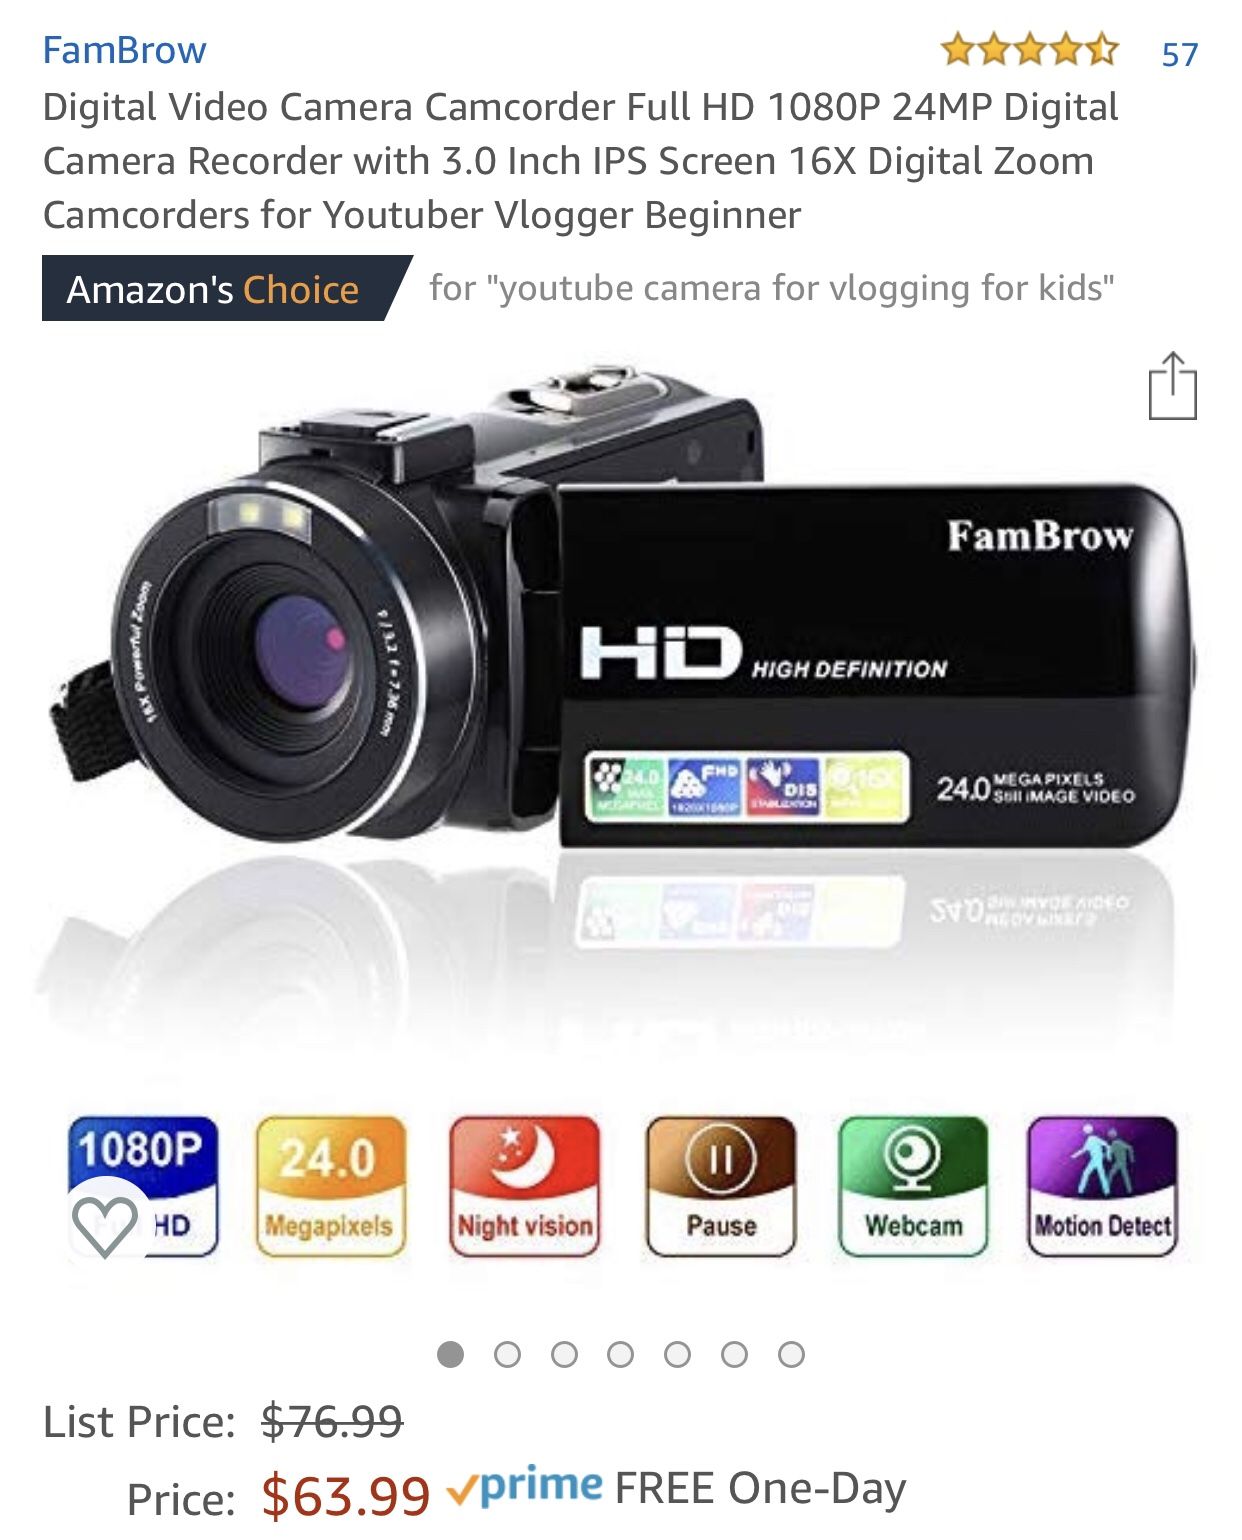 Digital Video Camera Camcorder Full HD 1080P 24MP Digital Camera Recorder with 3.0 Inch IPS Screen 16X Digital Zoom Camcorders for Youtuber Vlogger B